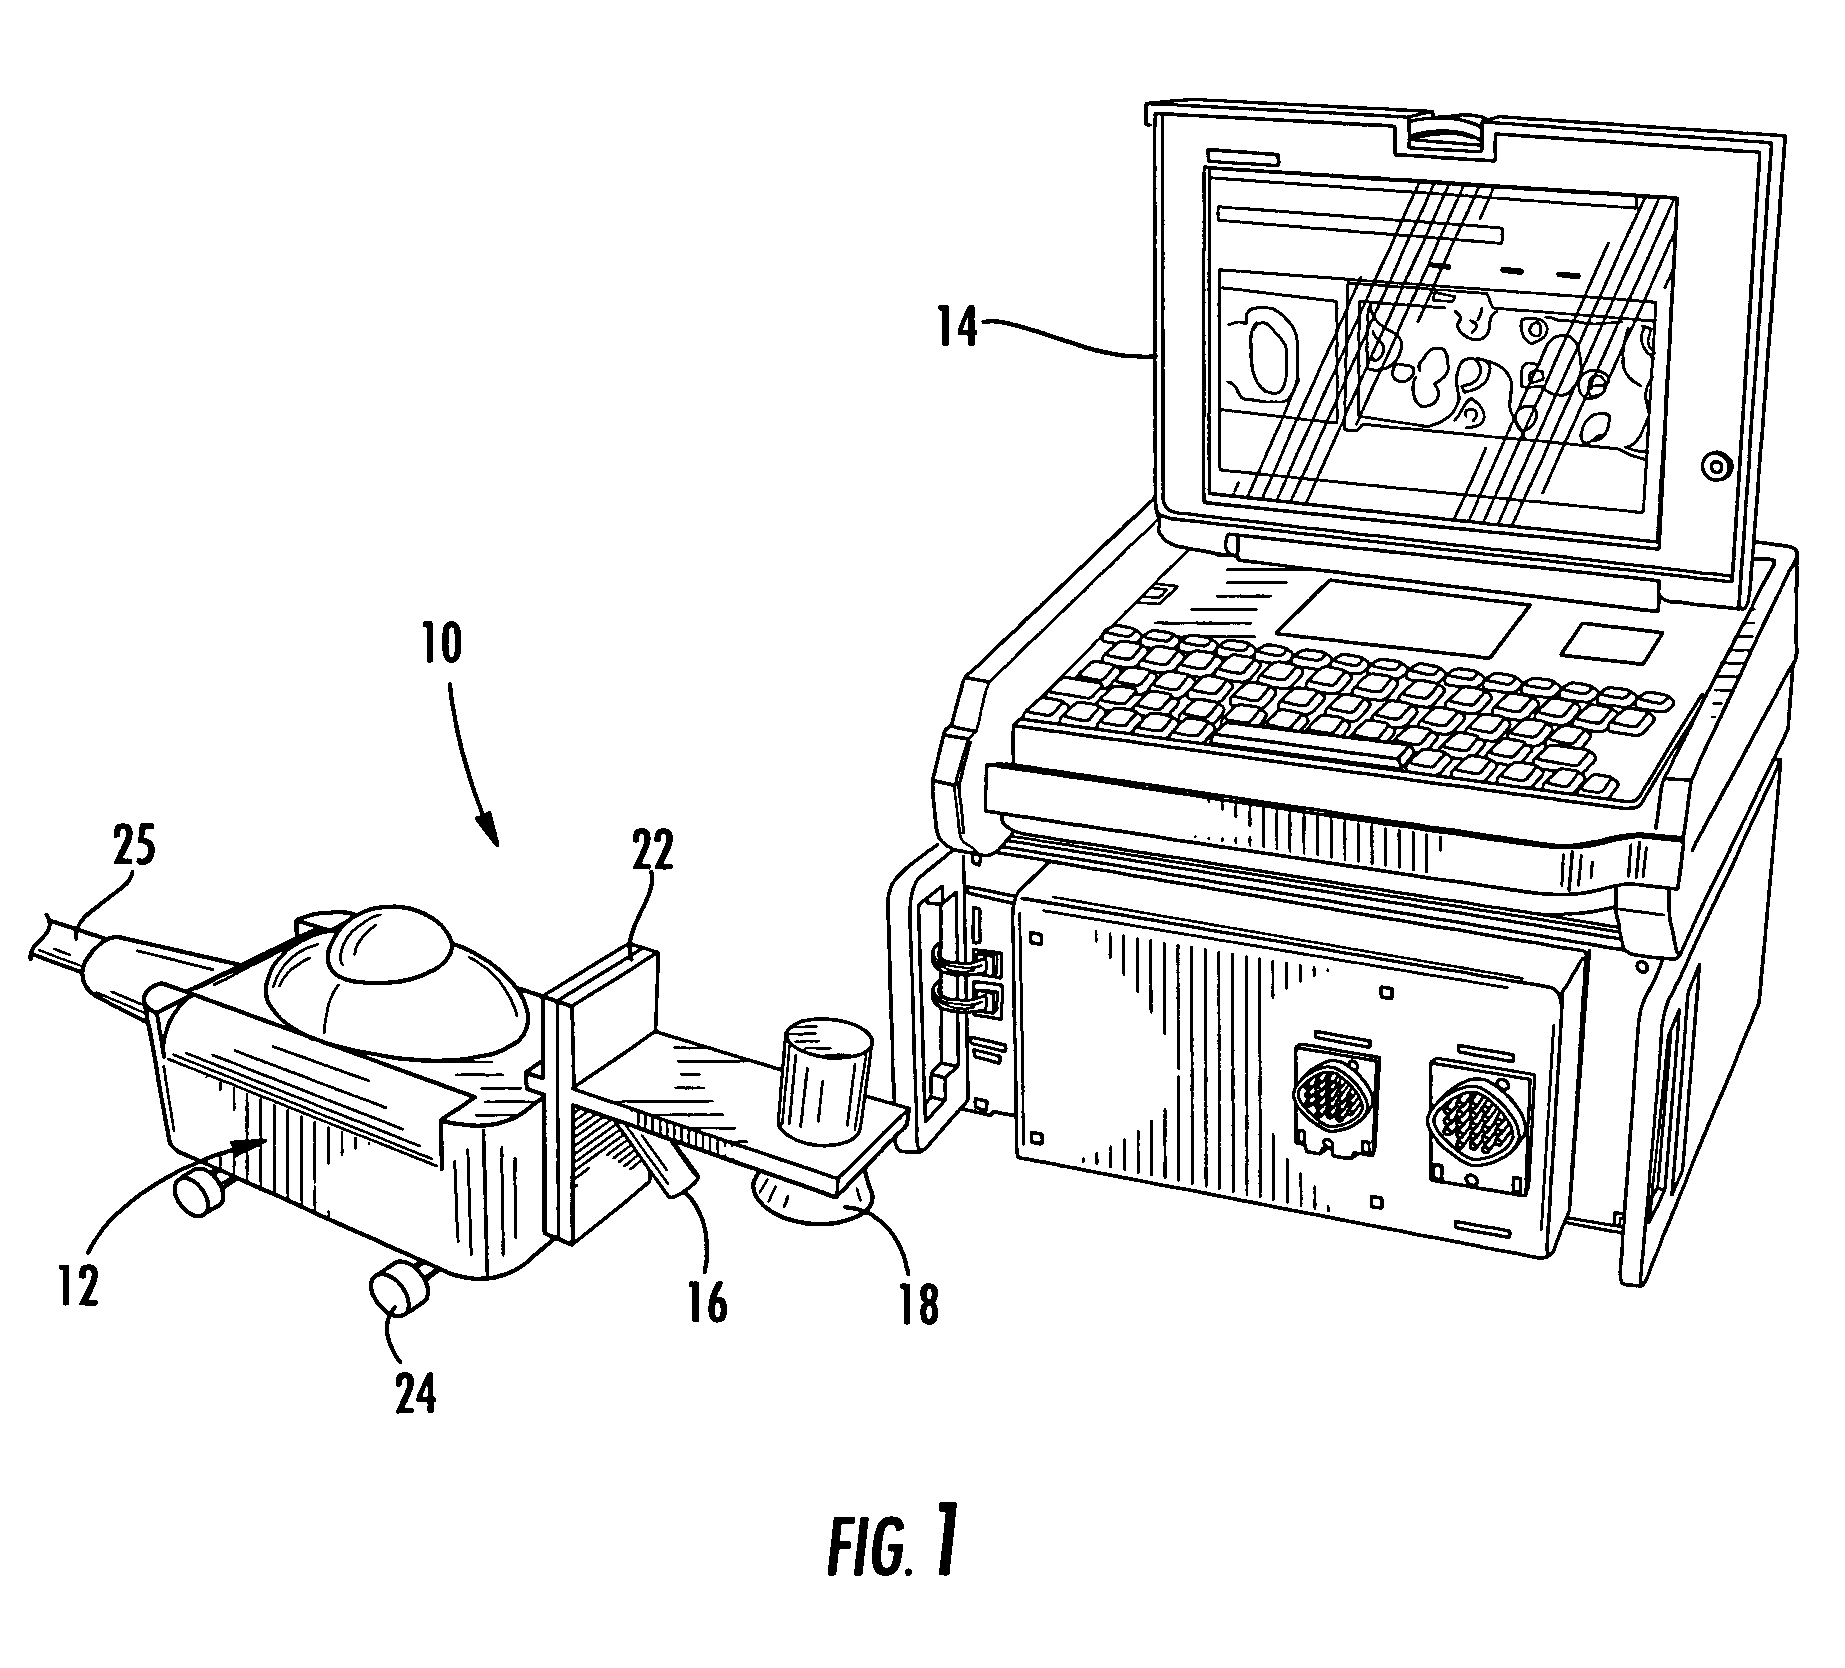 Non-destructive inspection using laser profiling and associated method